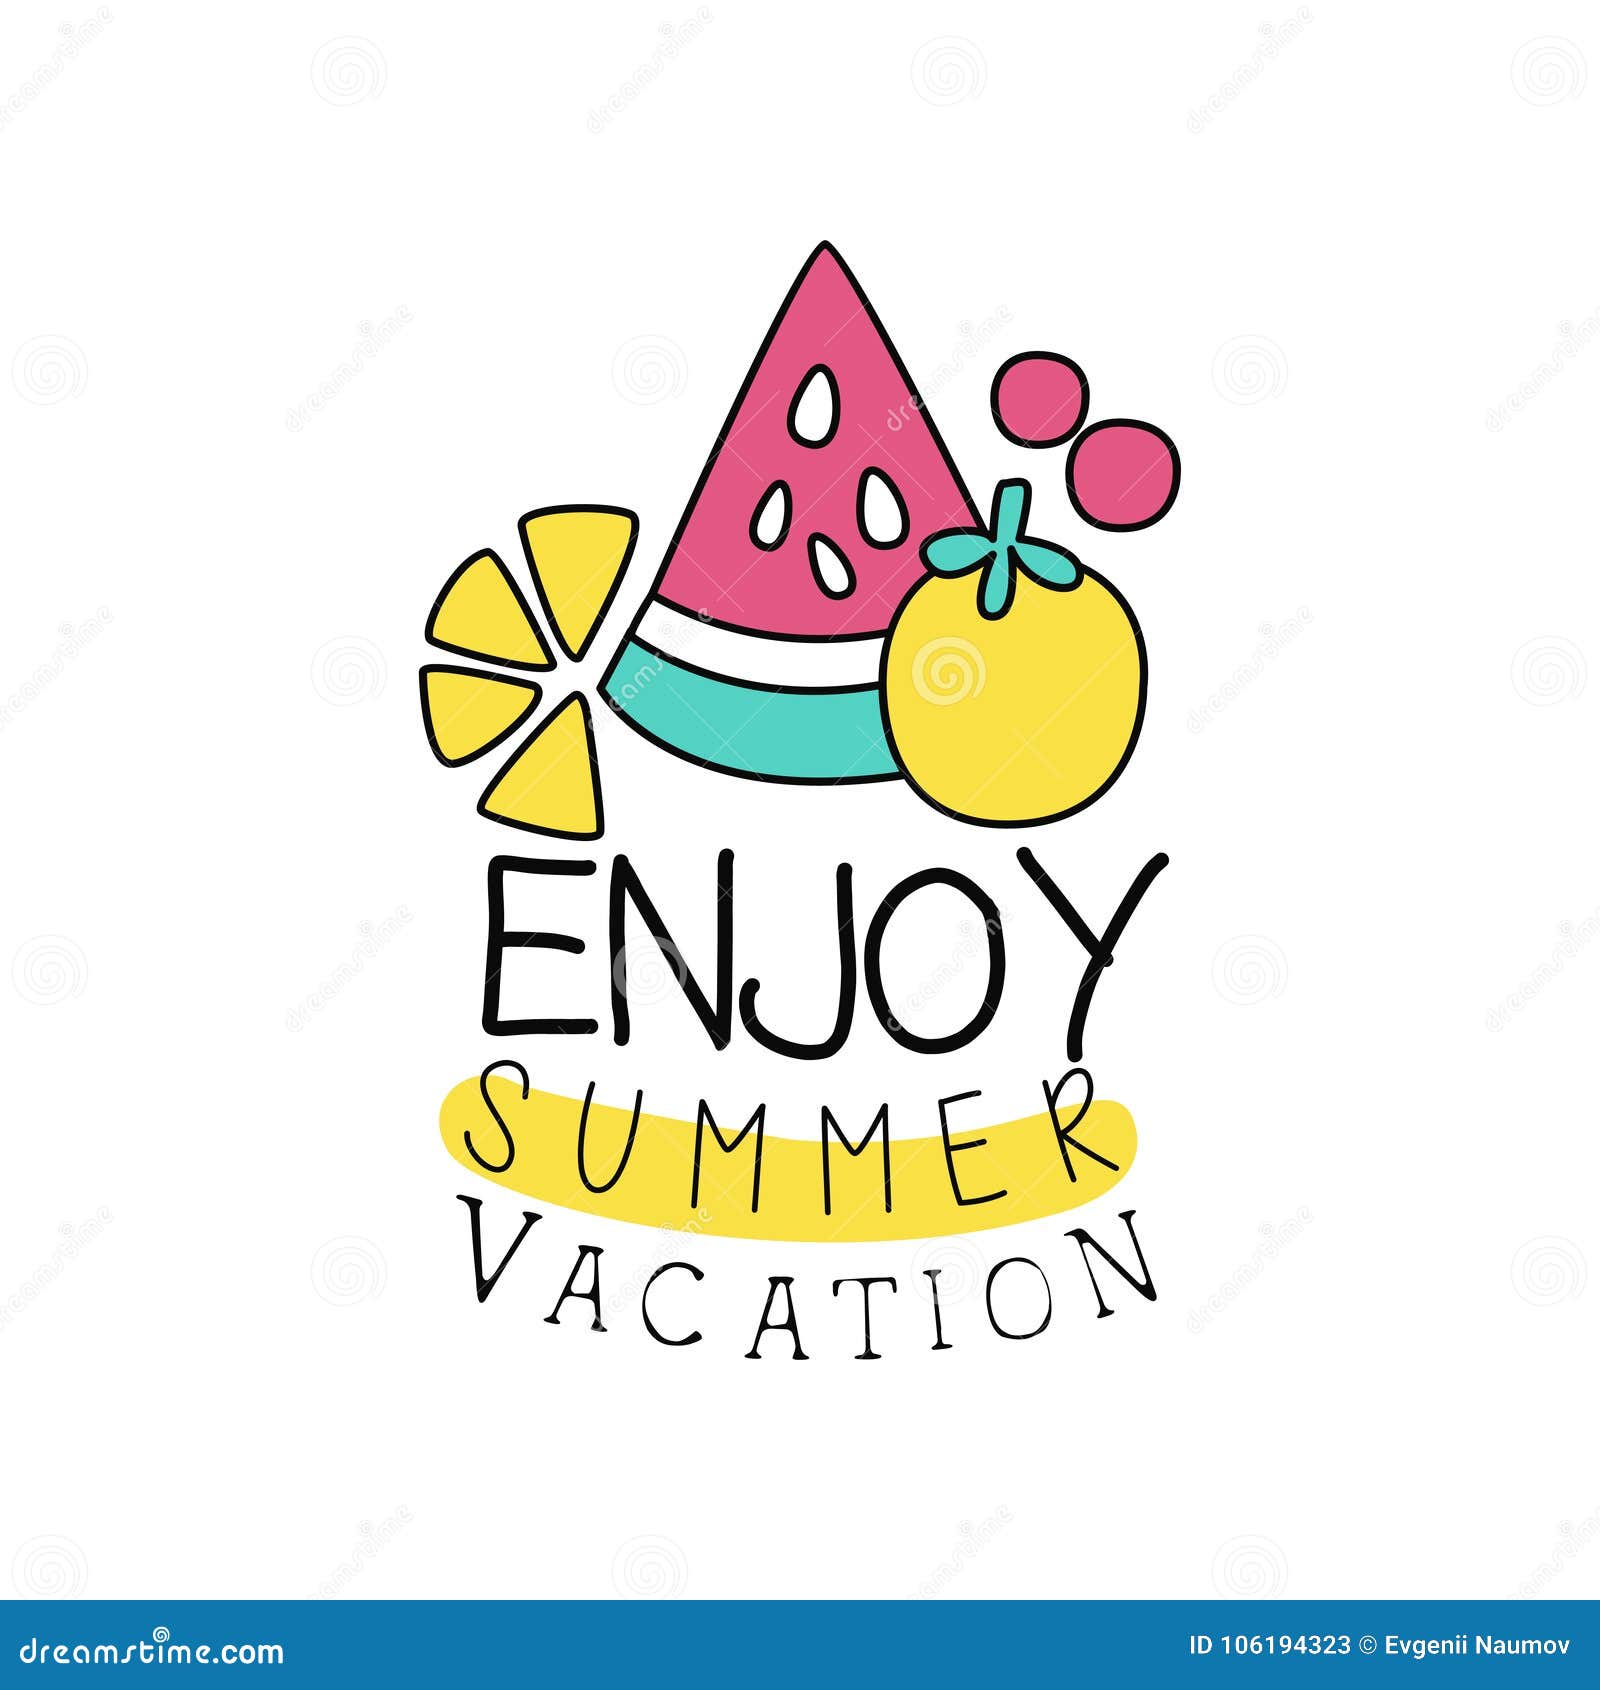 Hello summer vacation traditional doodle icons sketch hand made posters for  the wall • posters white, vectorial, vector | myloview.com